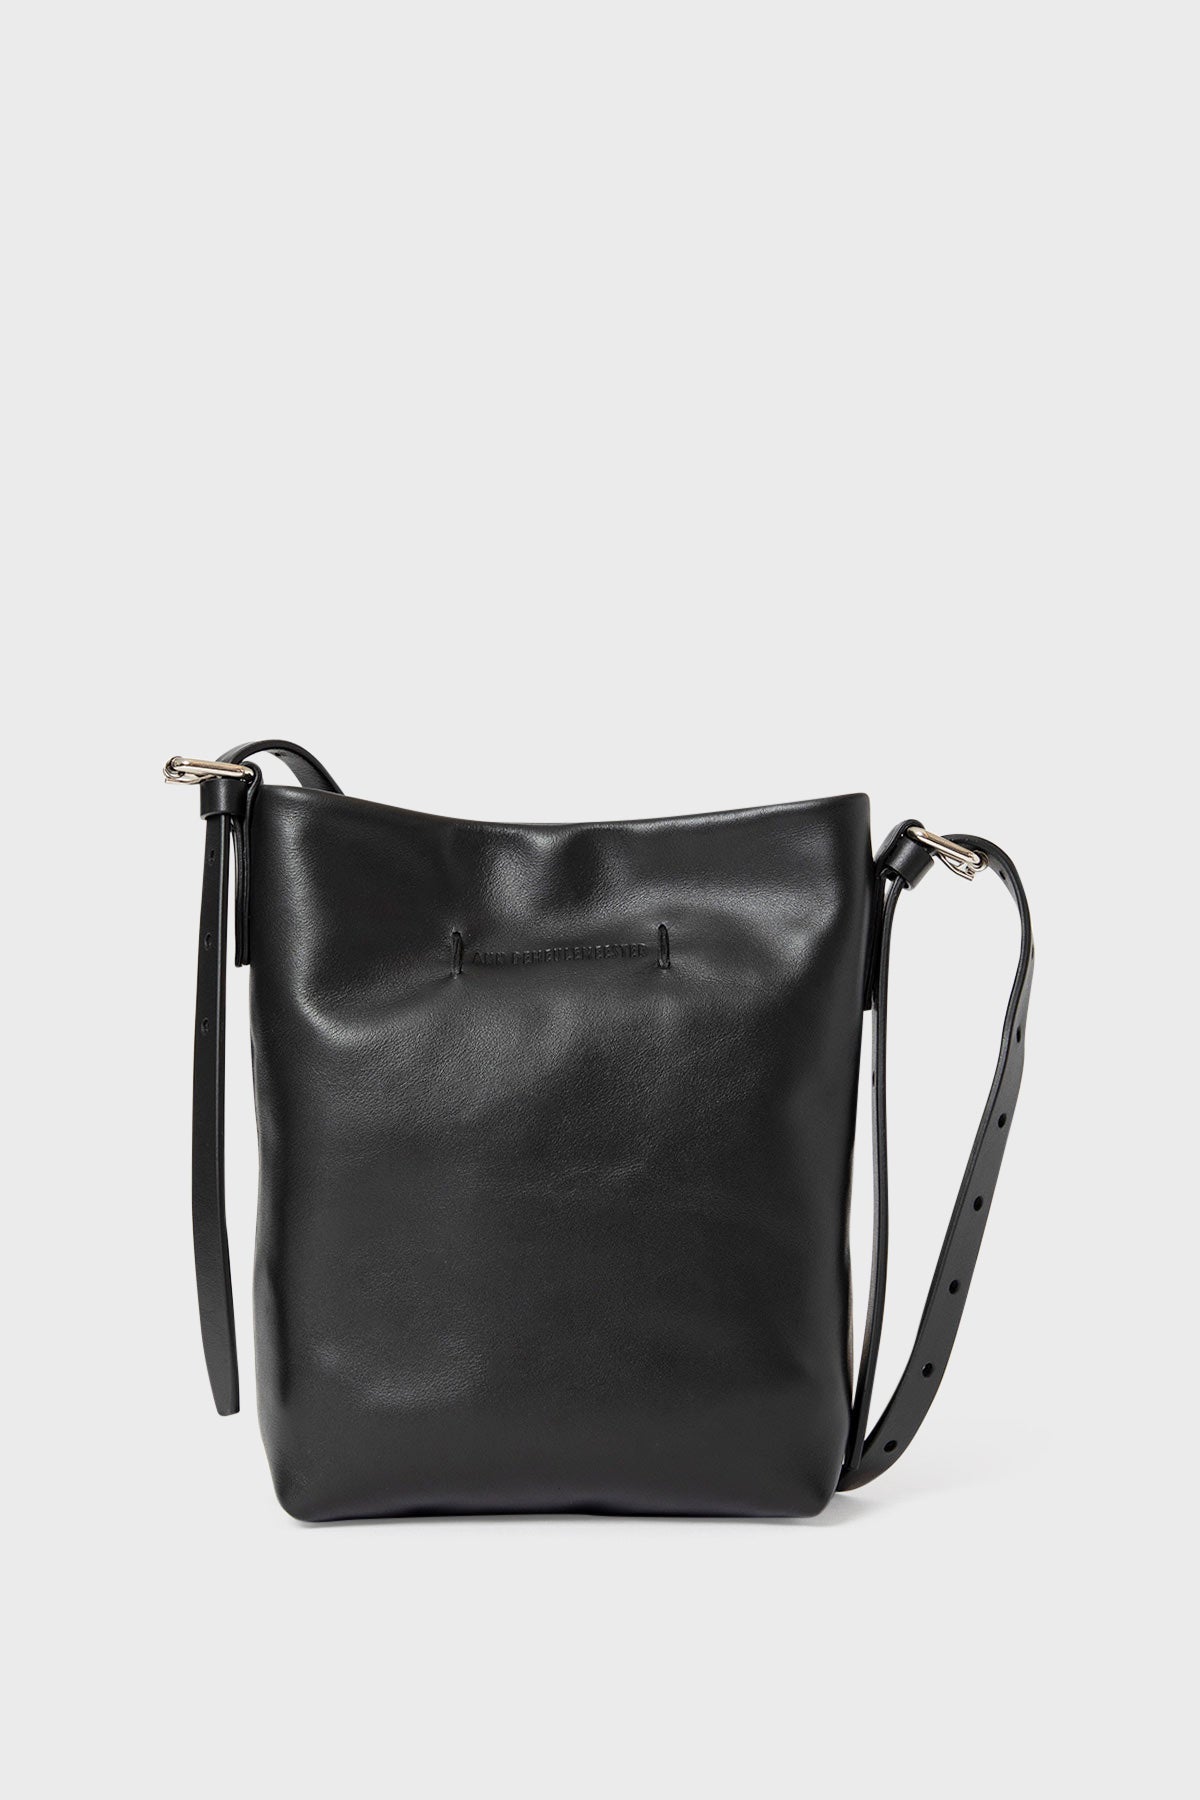 Bags Collection - Ann Demeulemeester